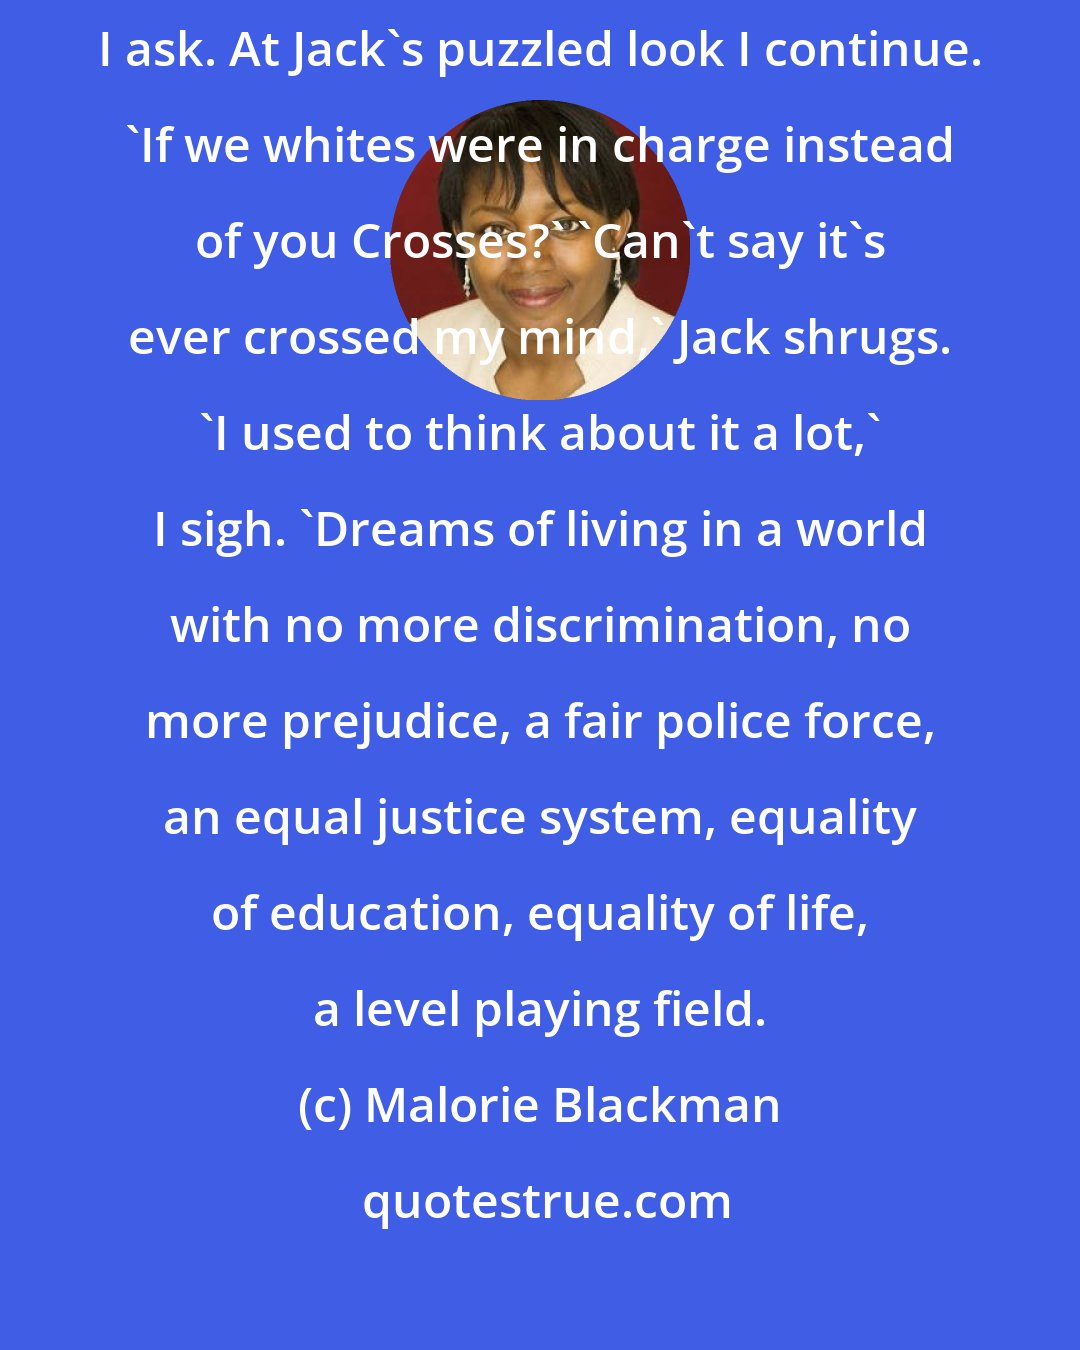 Malorie Blackman: D'you ever wonder what it would be like if our positions were reversed?' I ask. At Jack's puzzled look I continue. 'If we whites were in charge instead of you Crosses?' 'Can't say it's ever crossed my mind,' Jack shrugs. 'I used to think about it a lot,' I sigh. 'Dreams of living in a world with no more discrimination, no more prejudice, a fair police force, an equal justice system, equality of education, equality of life, a level playing field.